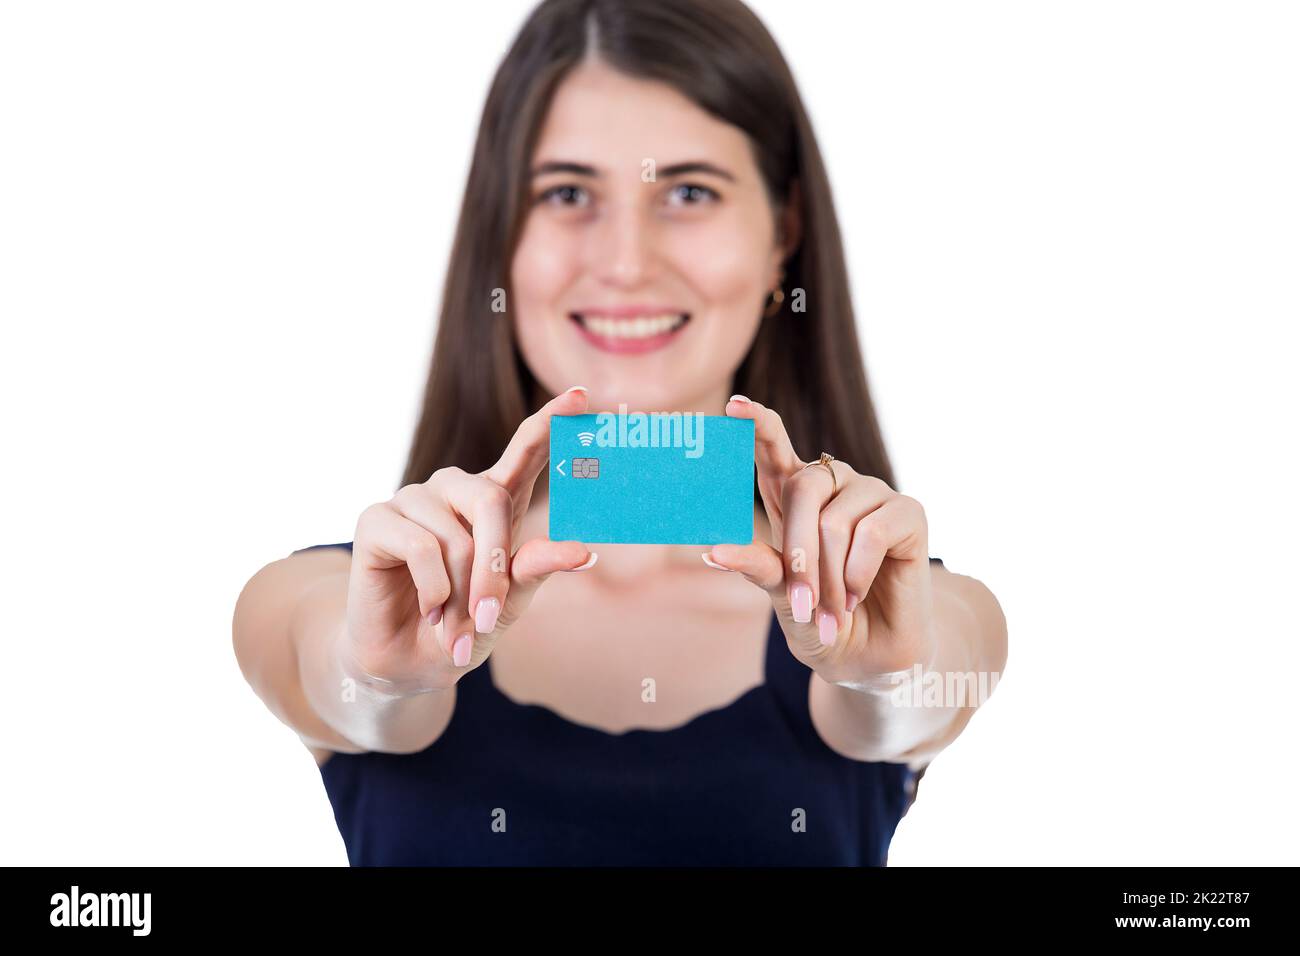 Close up portrait of a young woman with hands outstretched to camera, presenting a credit card. Girl advertising her favorite bank, financial concept Stock Photo